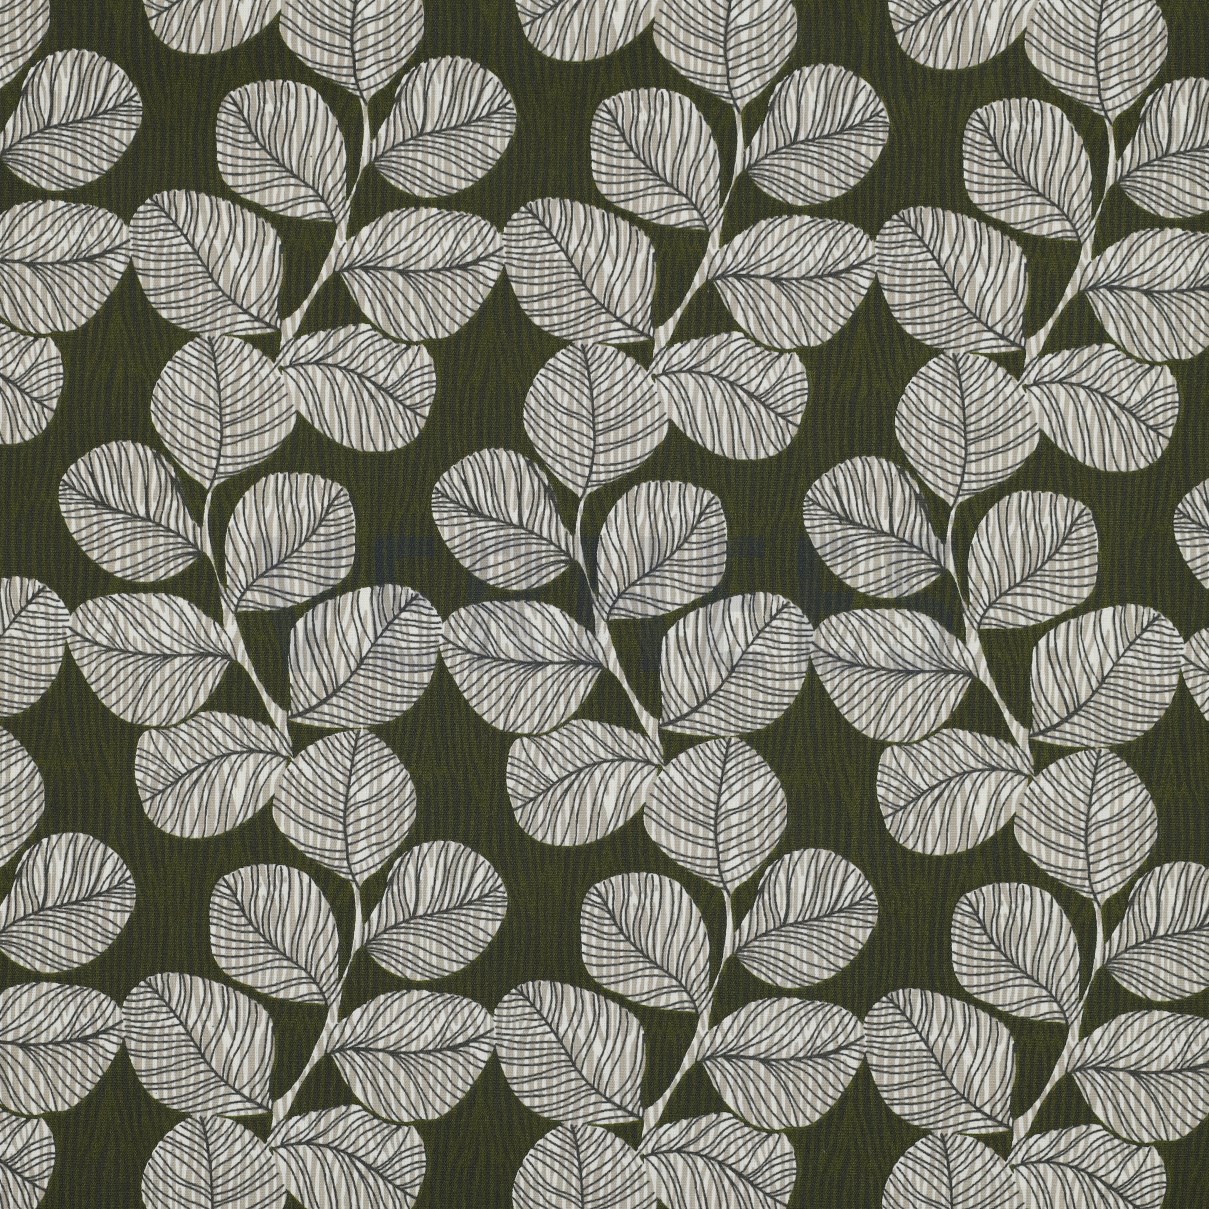 COATED COTTON LEAVES ARMY GREEN (high resolution)